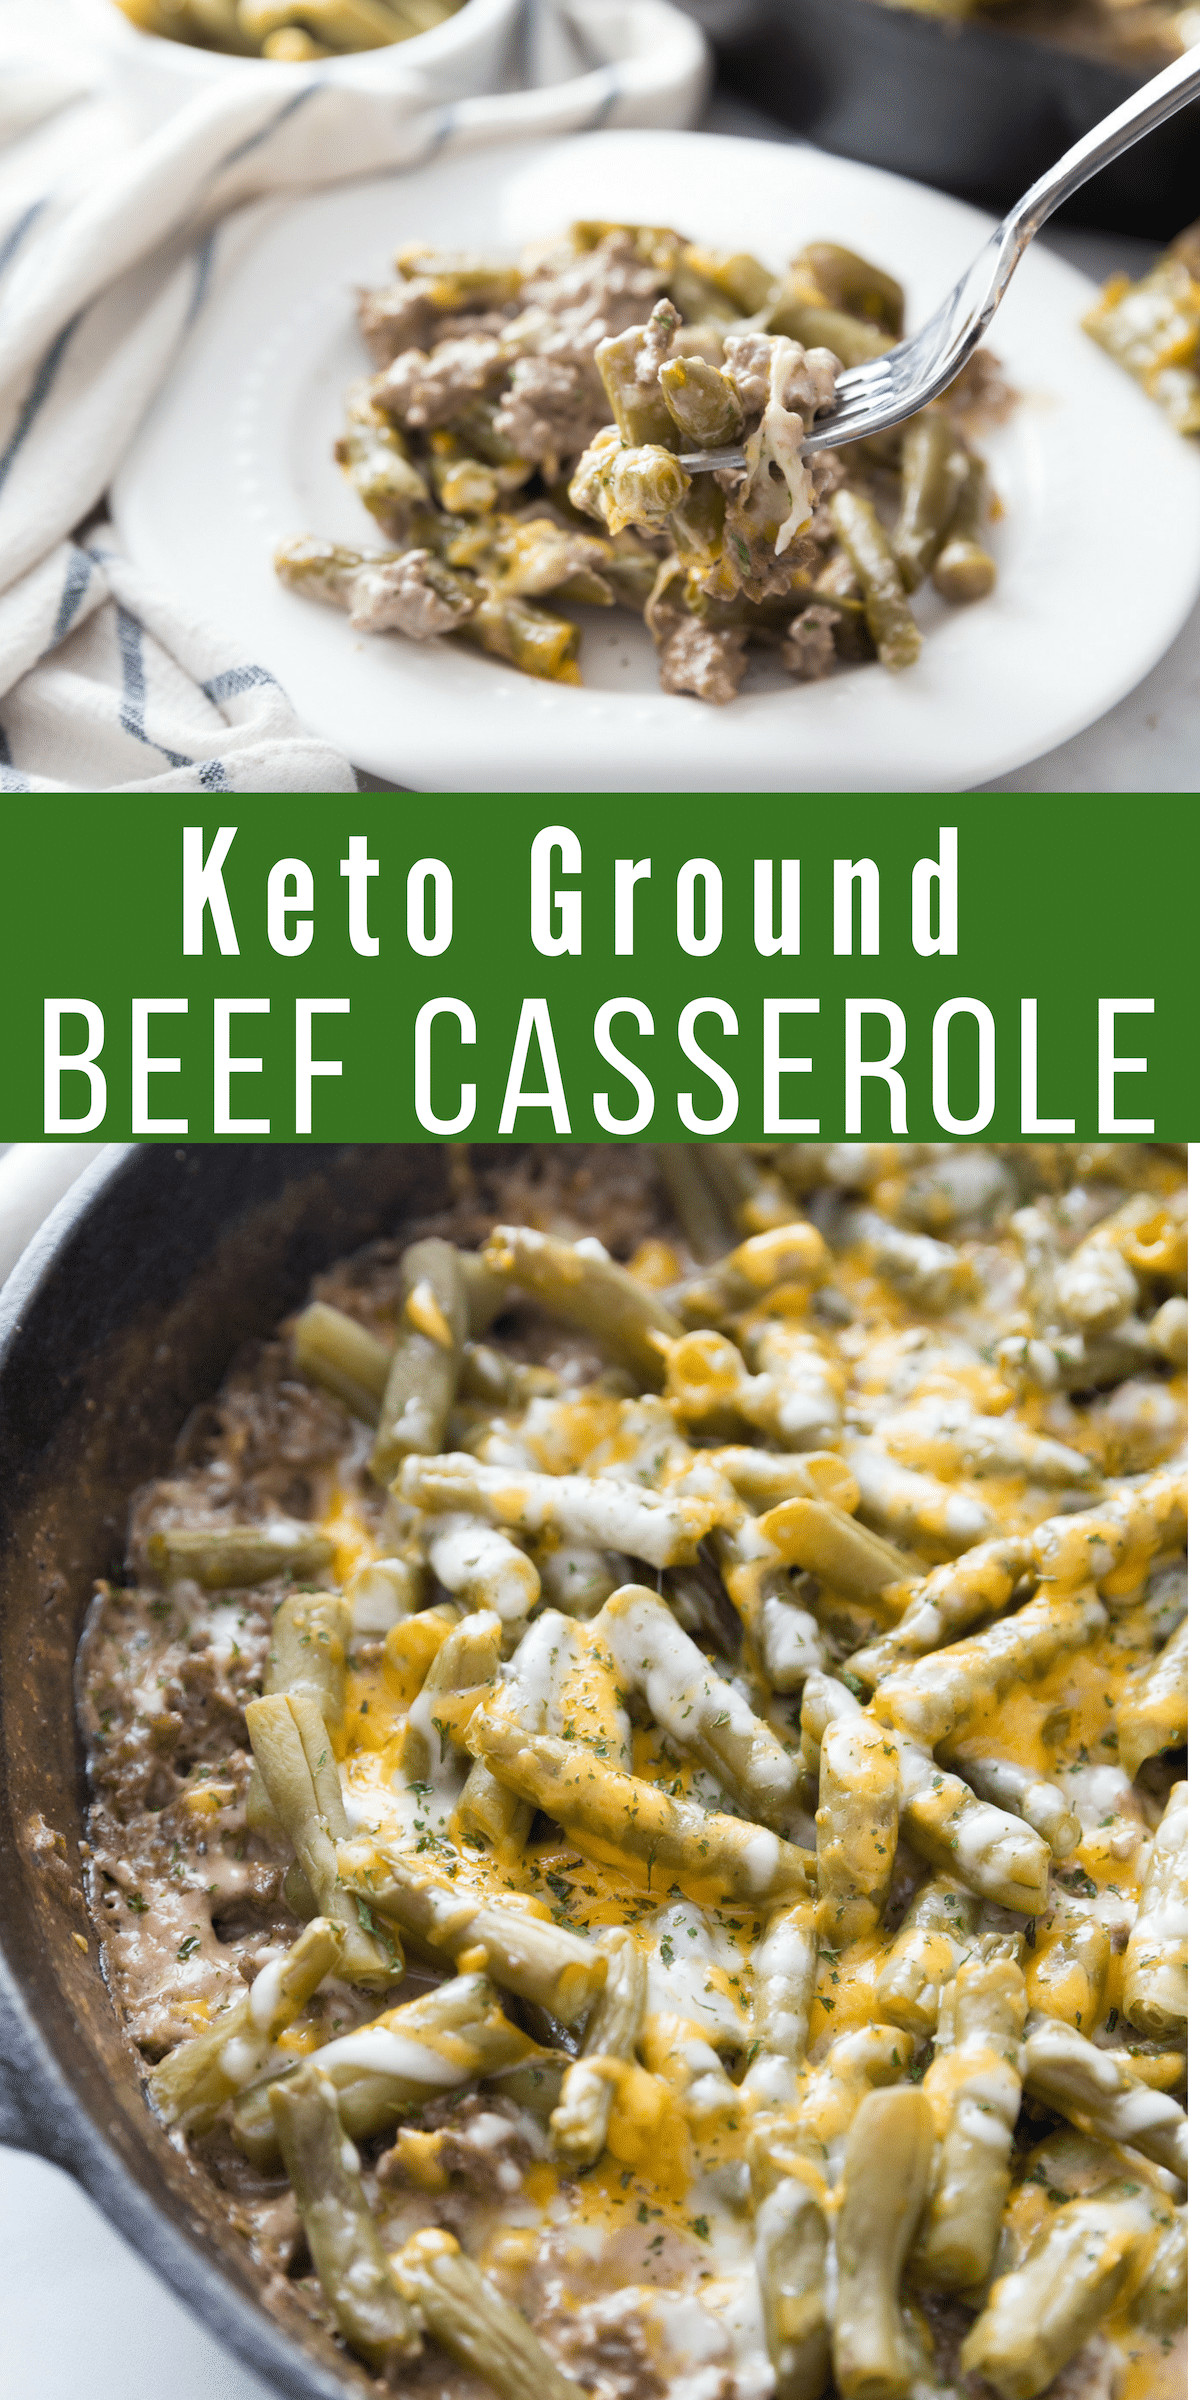 Low Carb Ground Beef Recipes Cream Cheese
 Keto Ground Beef Casserole Perfect fort Dish